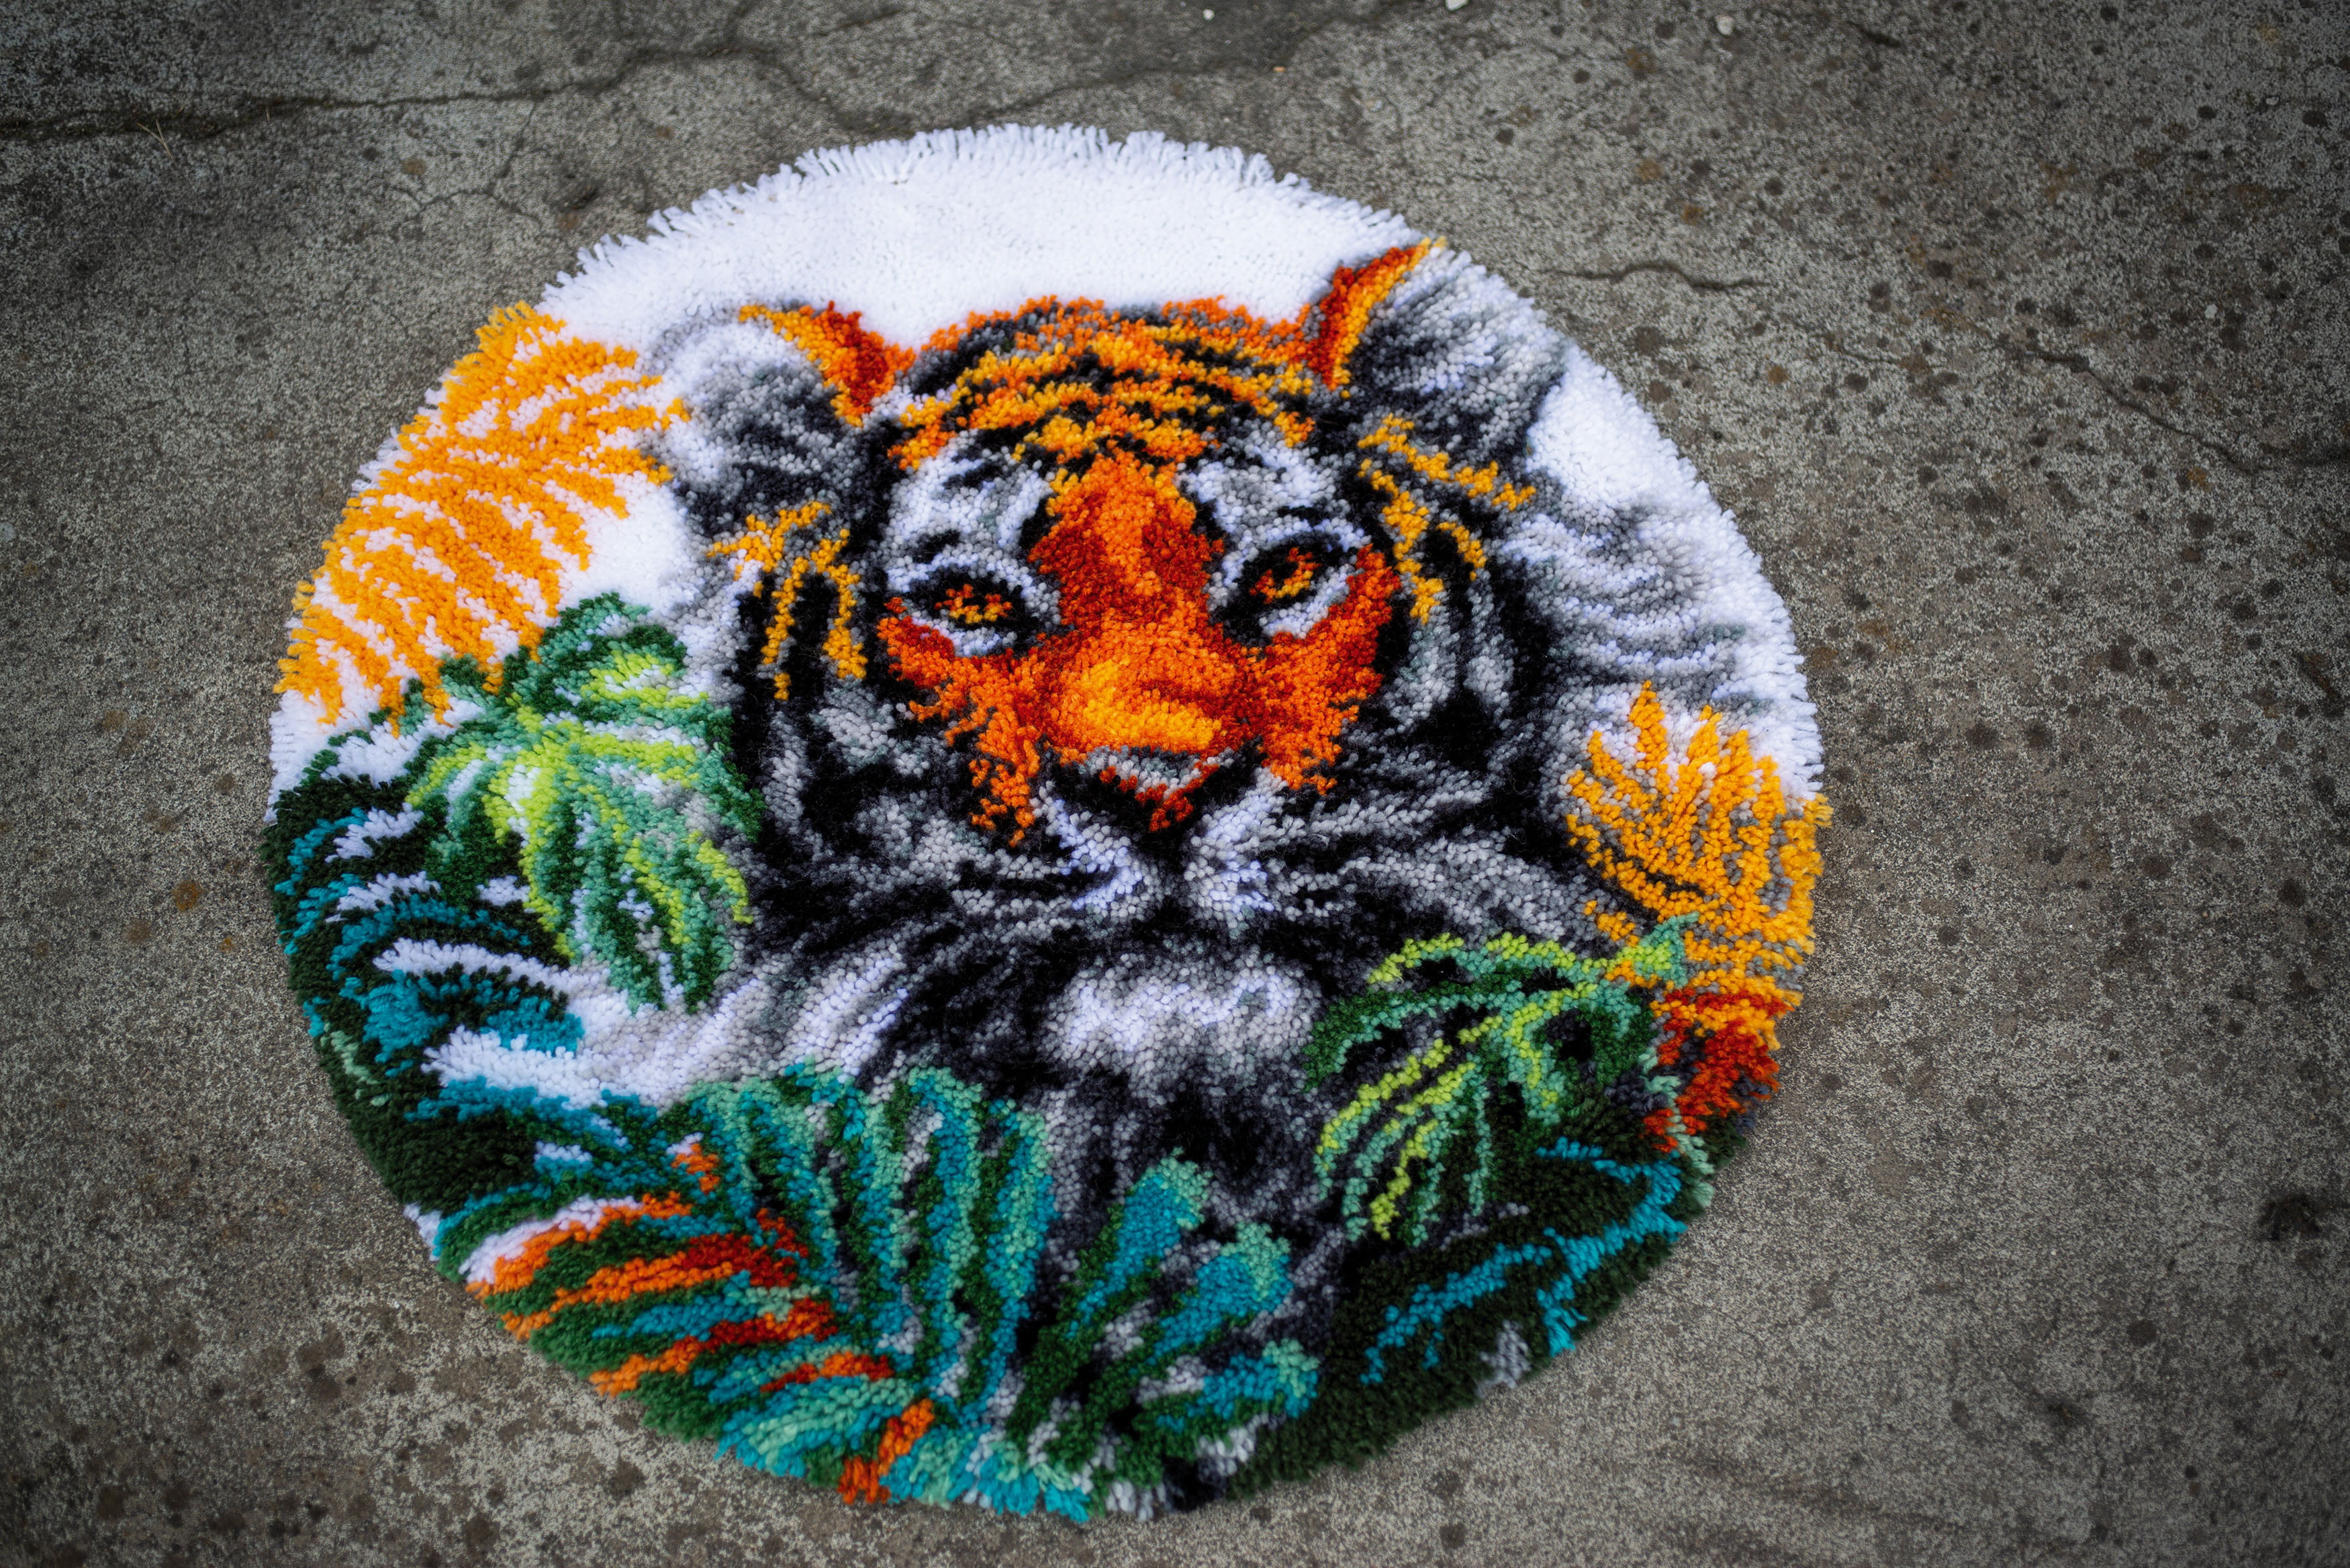 Tiger DIY Latch Hook Kits Needlework Gift 16" by 16" Rug Cushion Cover 